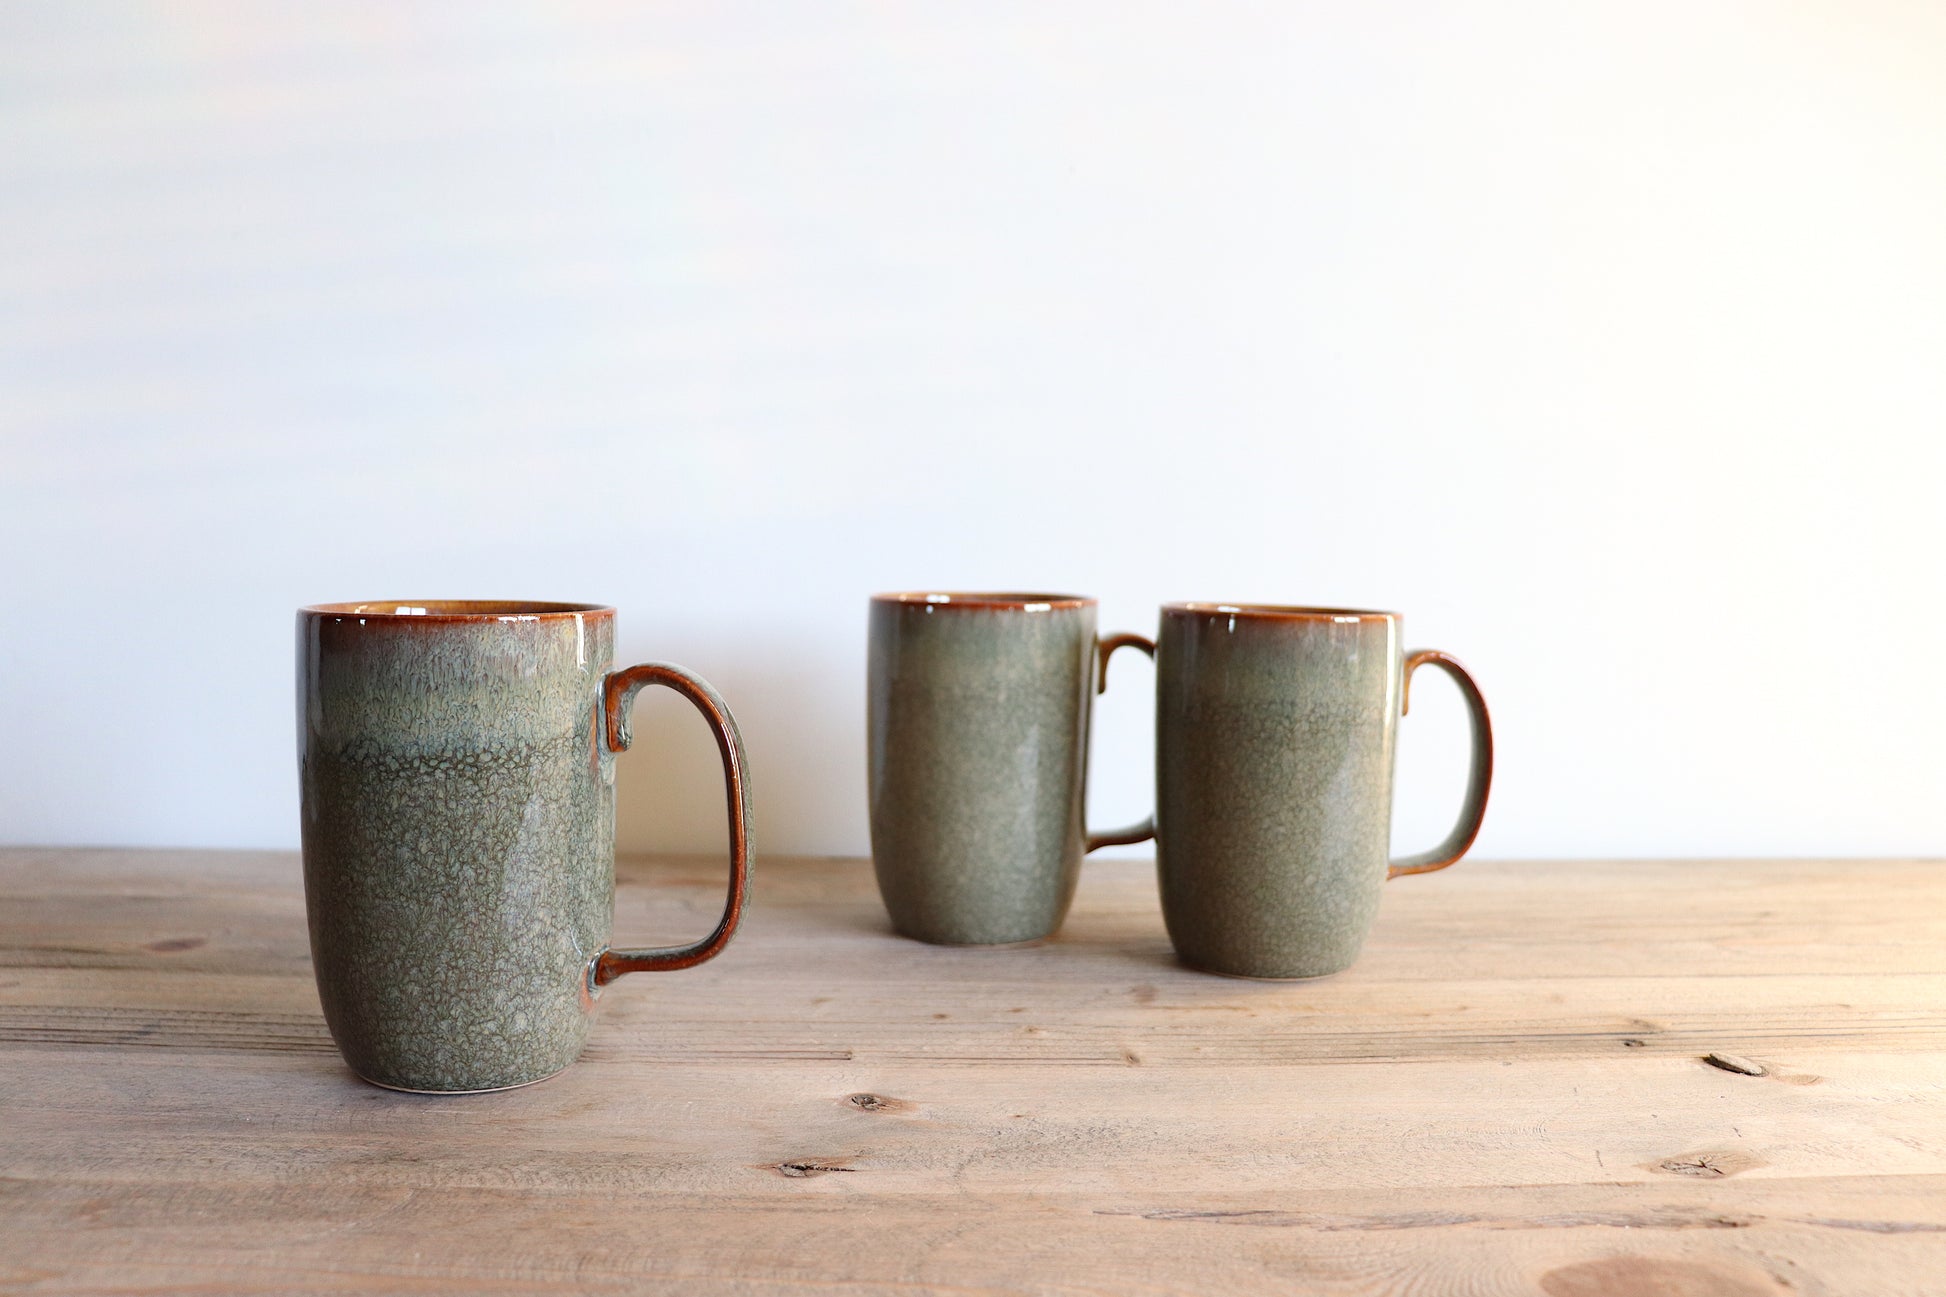 Tall green mug with a brown rim and edge of handles. The green glaze is slightly iridescent , giving a beautiful overall effect. The colour is both on the outside and inside of the cup. Standing on a wooden surface with white background.